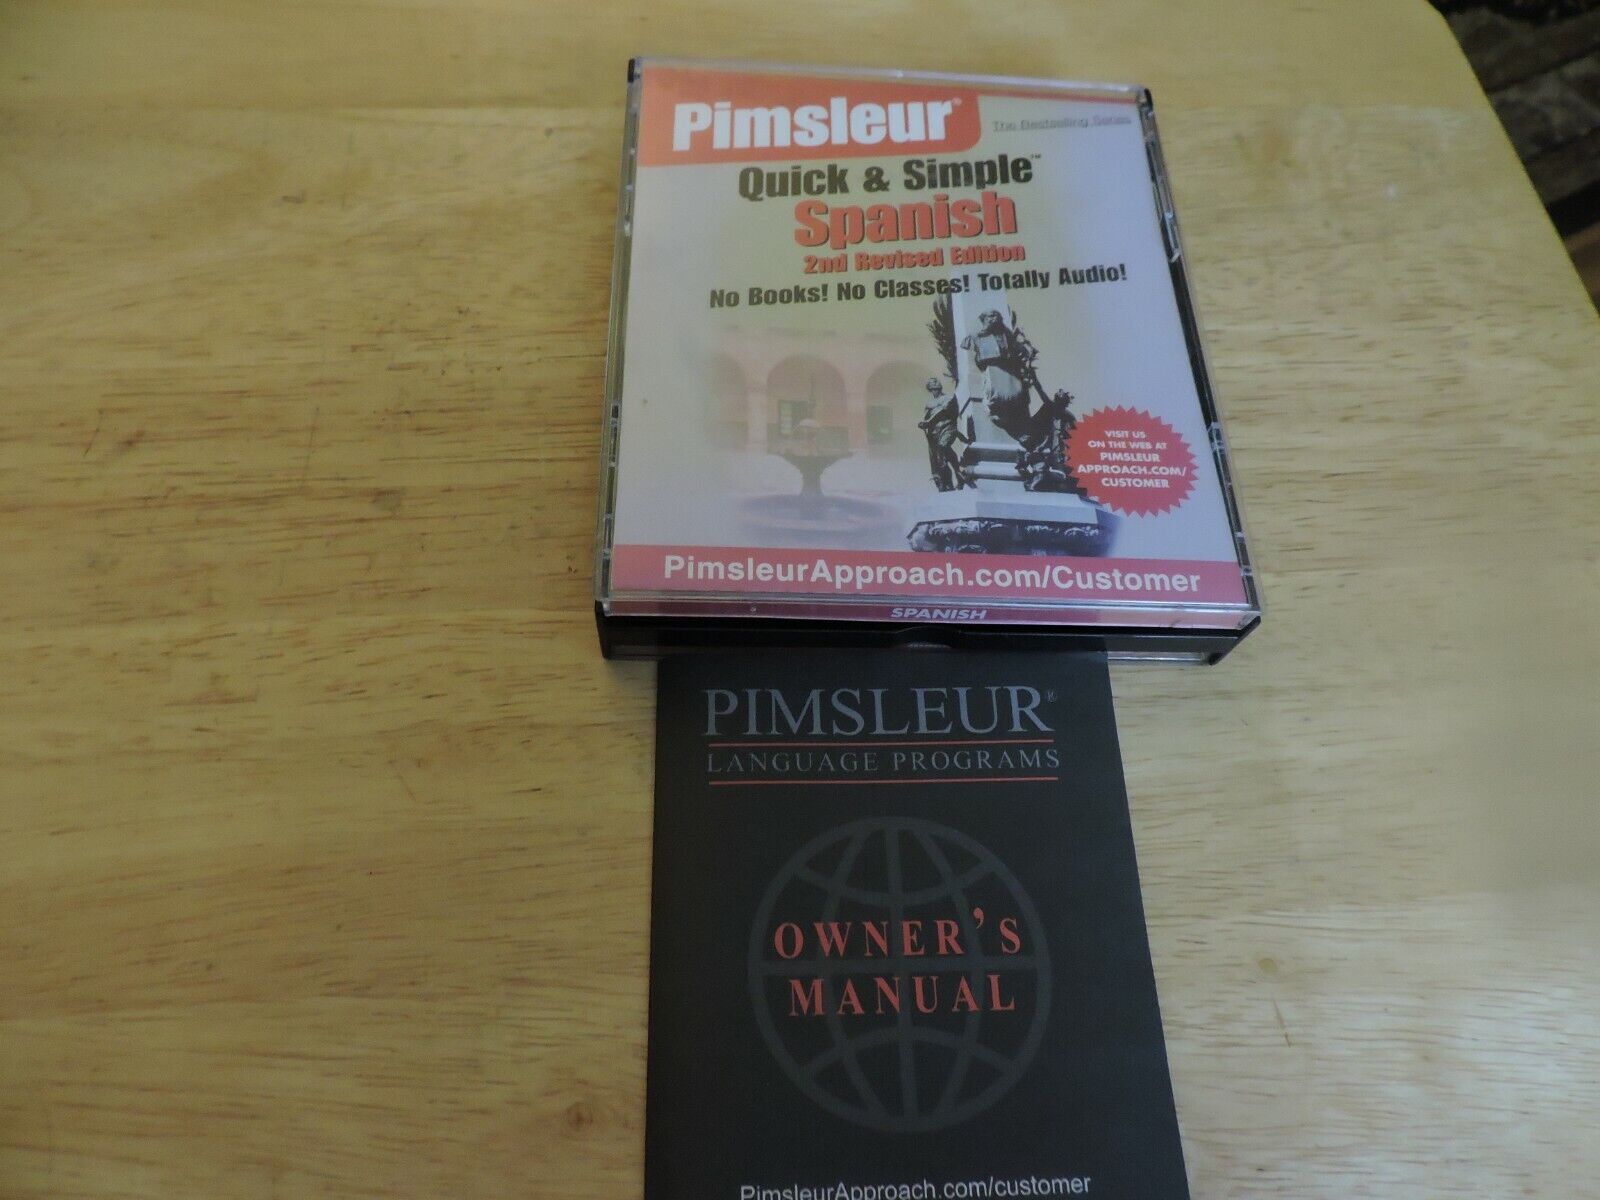 PIMSLEUR QUICK AND SIMPLE SPANISH 2ND REVISED EDITION (4 DISCS)